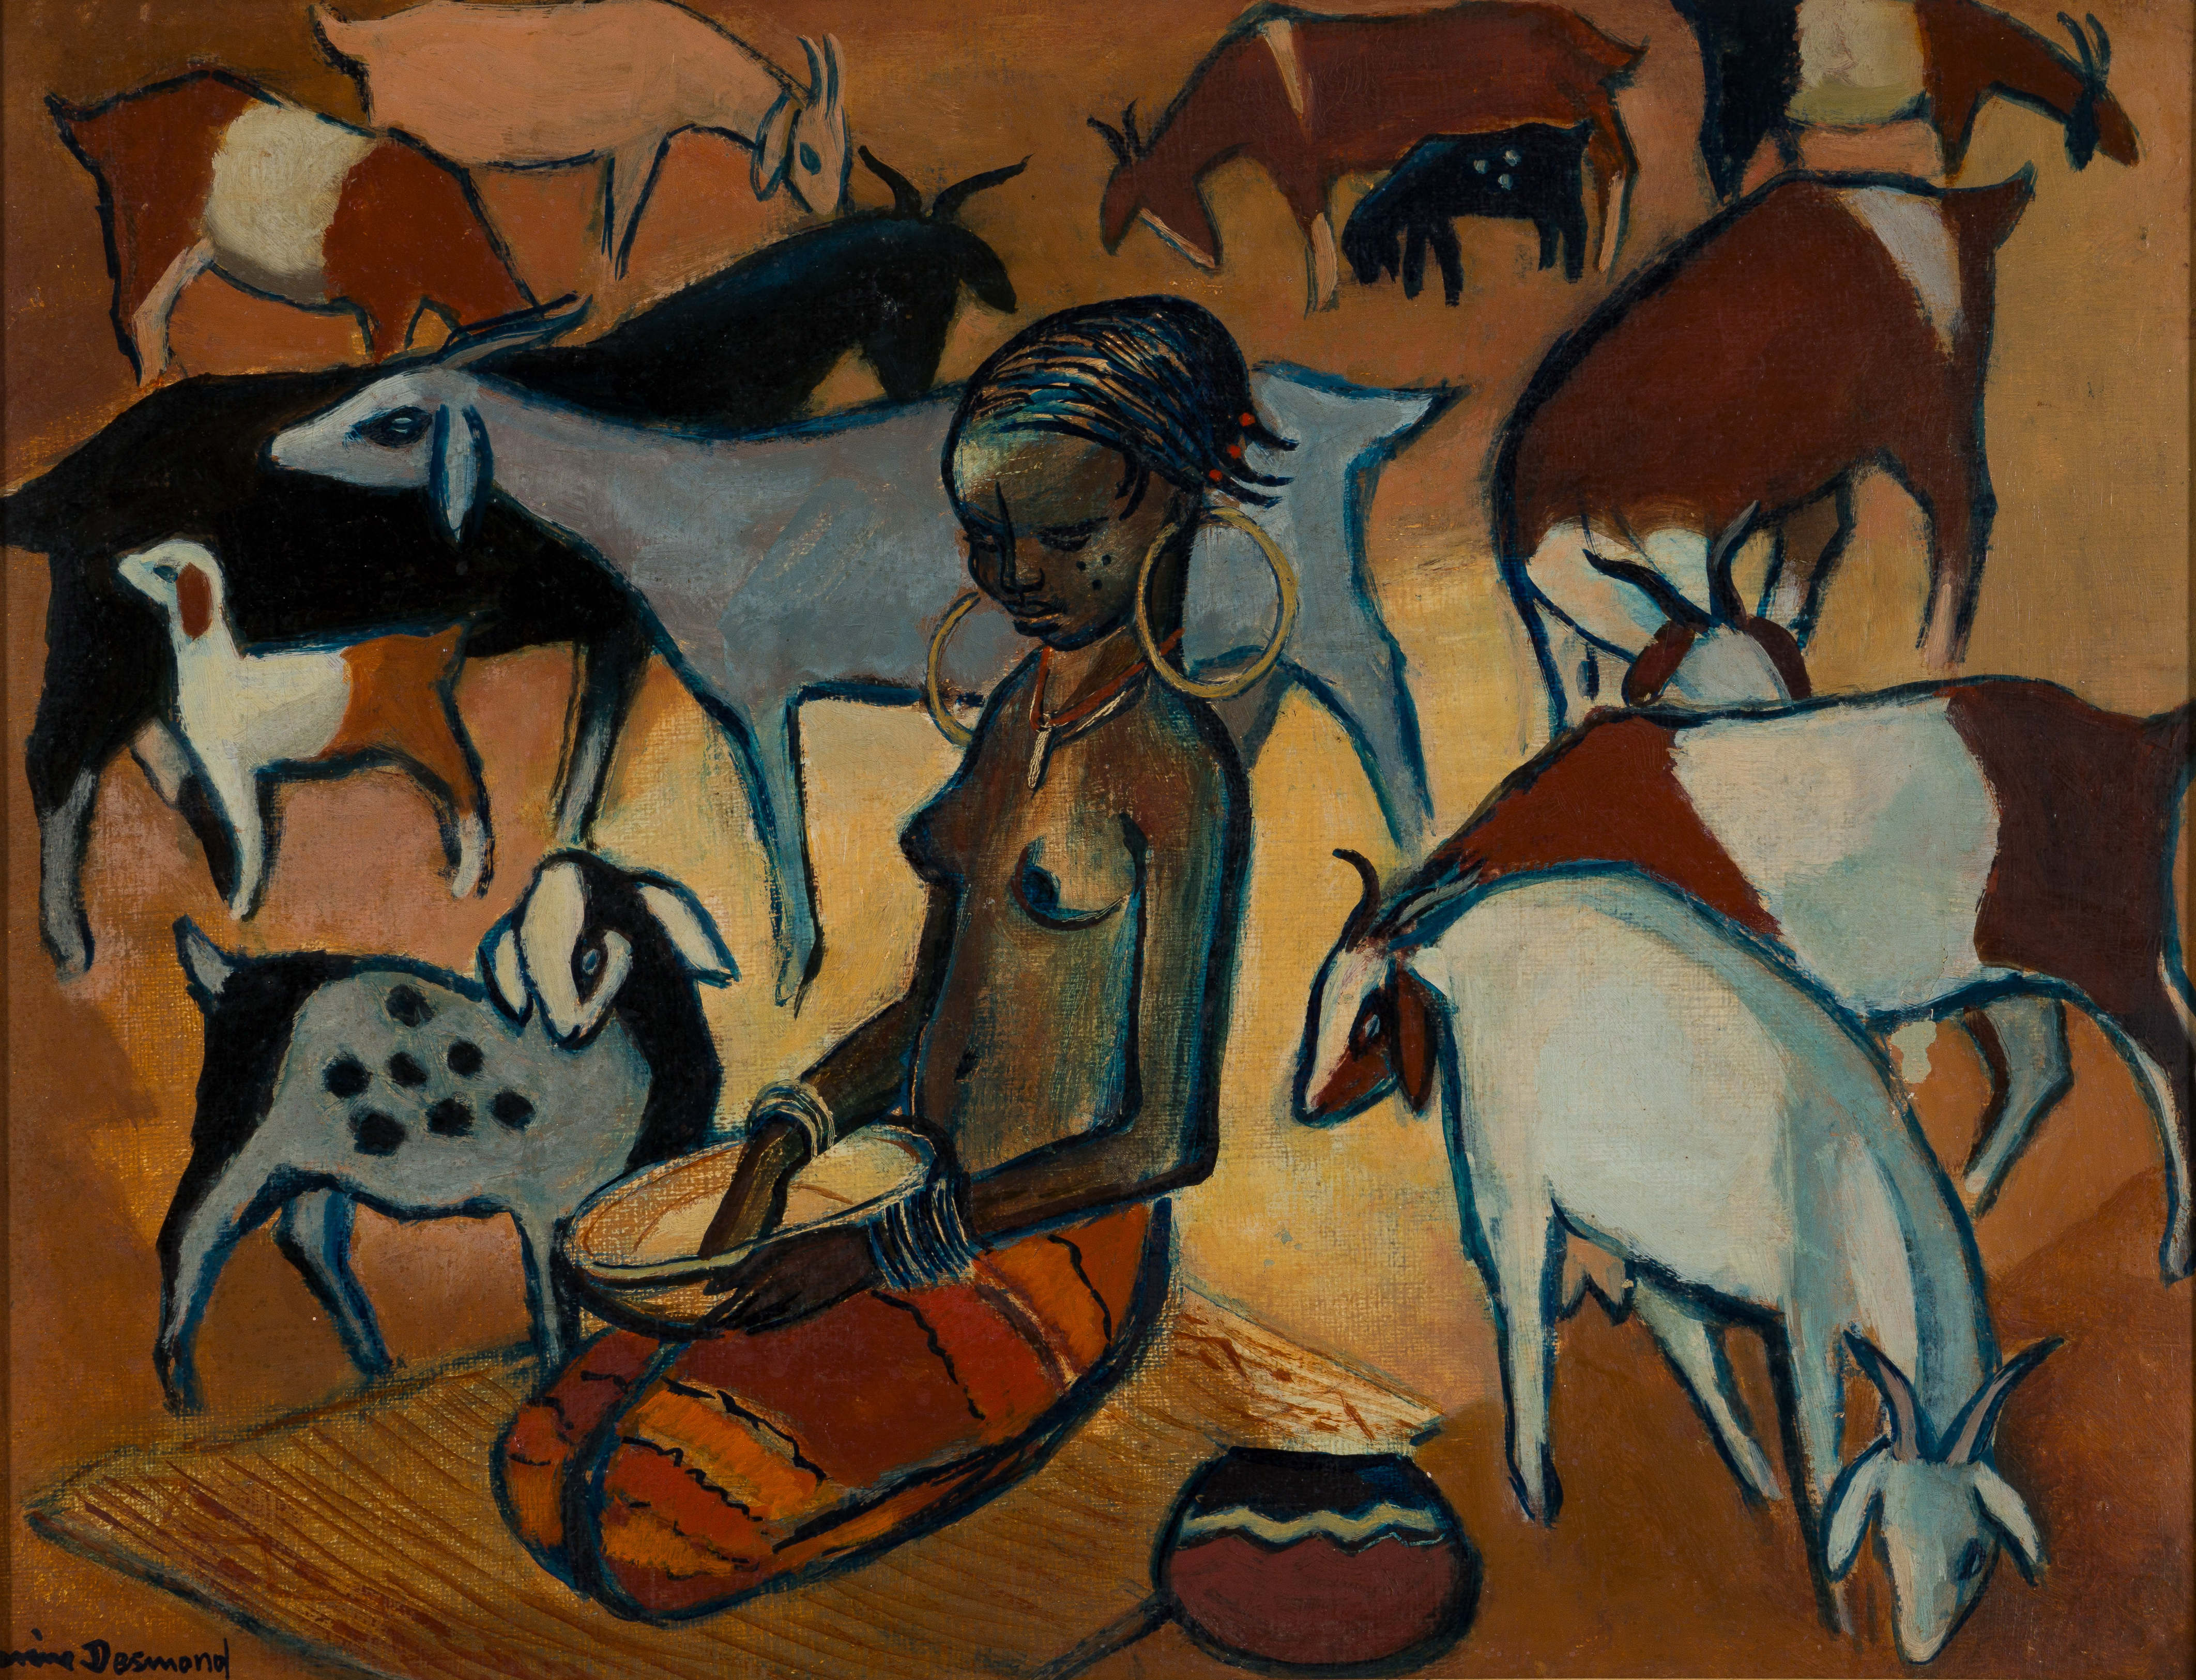 Nerine Desmond; Woman with Goats